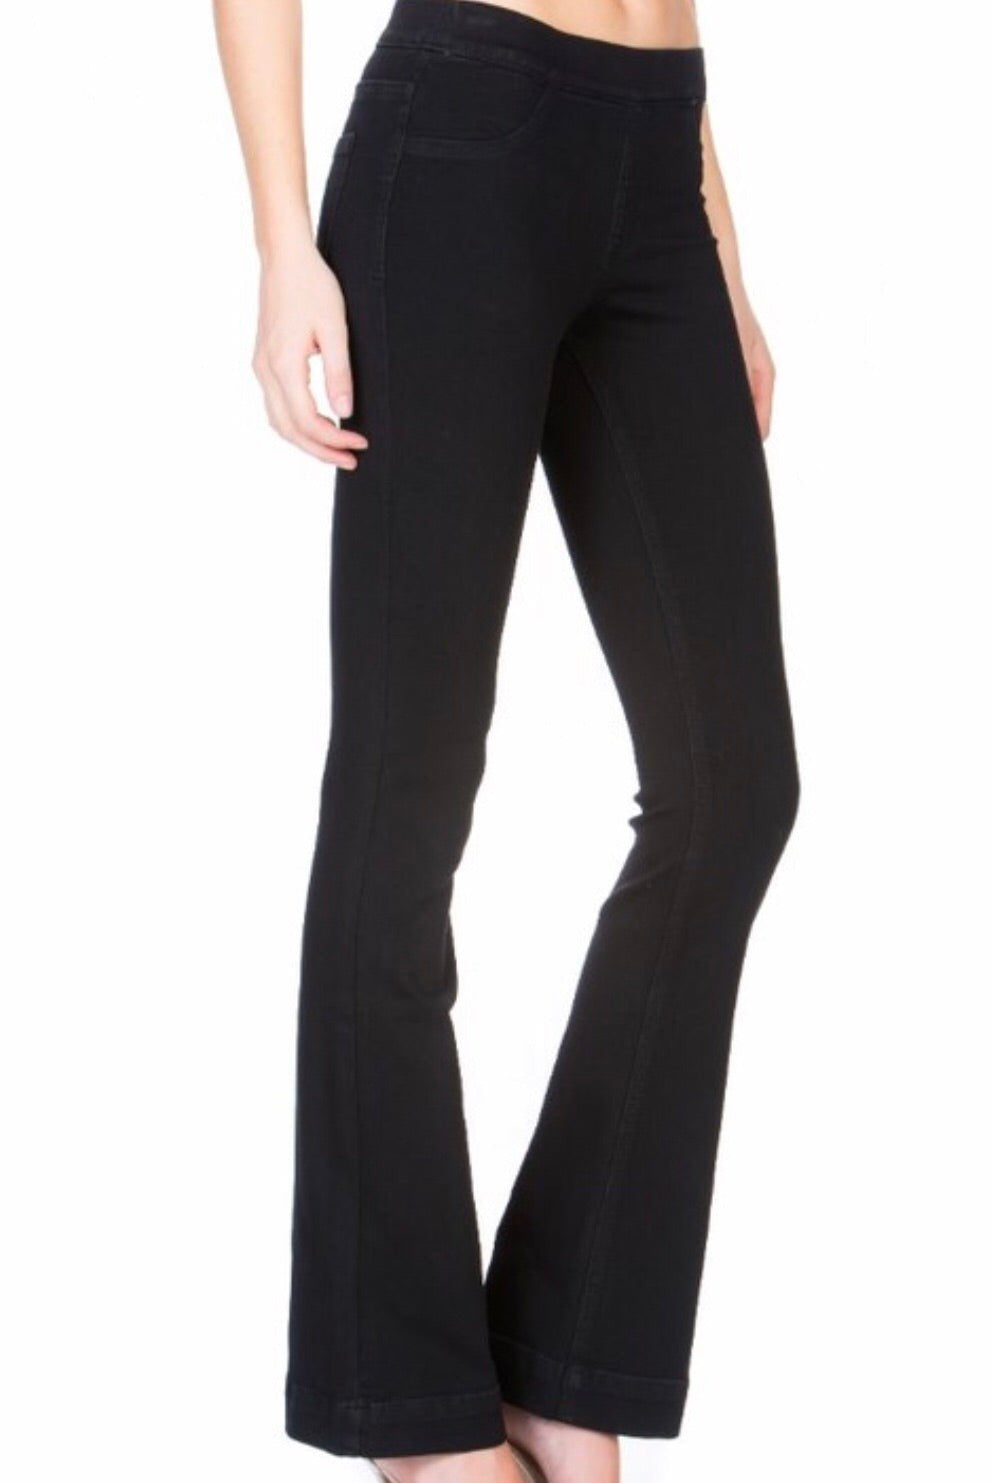 Cello Pull On Flare Jeans - Black - jeans -Jimberly's Boutique-Olive Branch-Mississippi